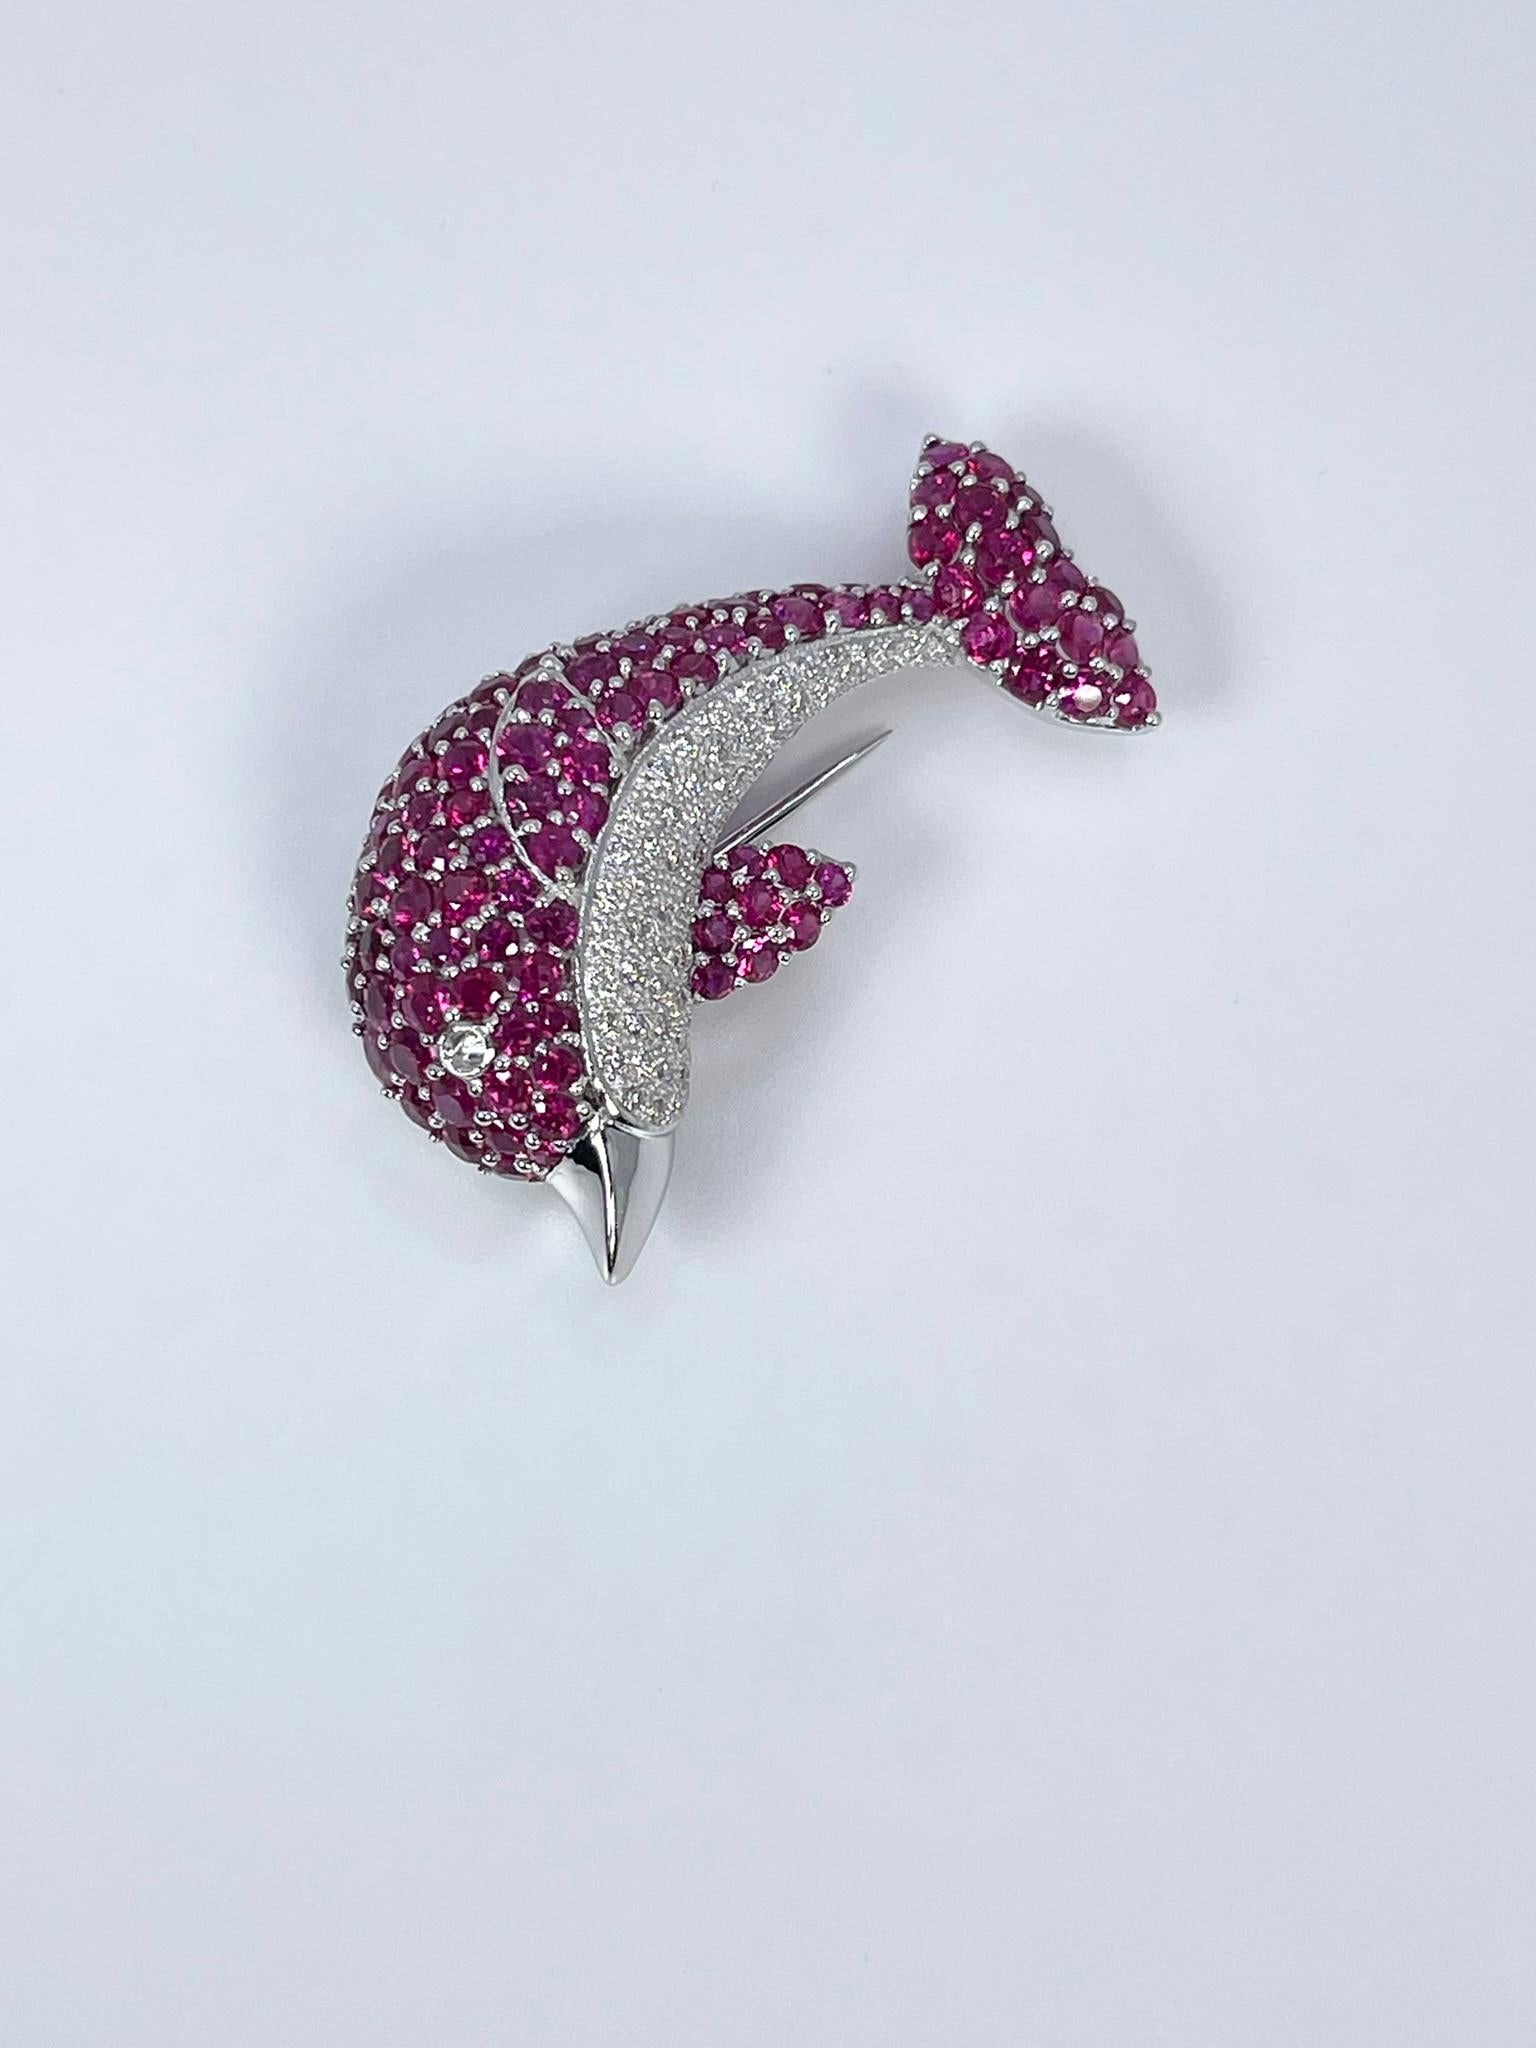 Astonishgly beautiful dolphin made with natural rubies and diamonds in 18KT white gold.
GRAM WEIGHT: 11.70gr
GOLD: 18KT white gold
SIZE: 1.72